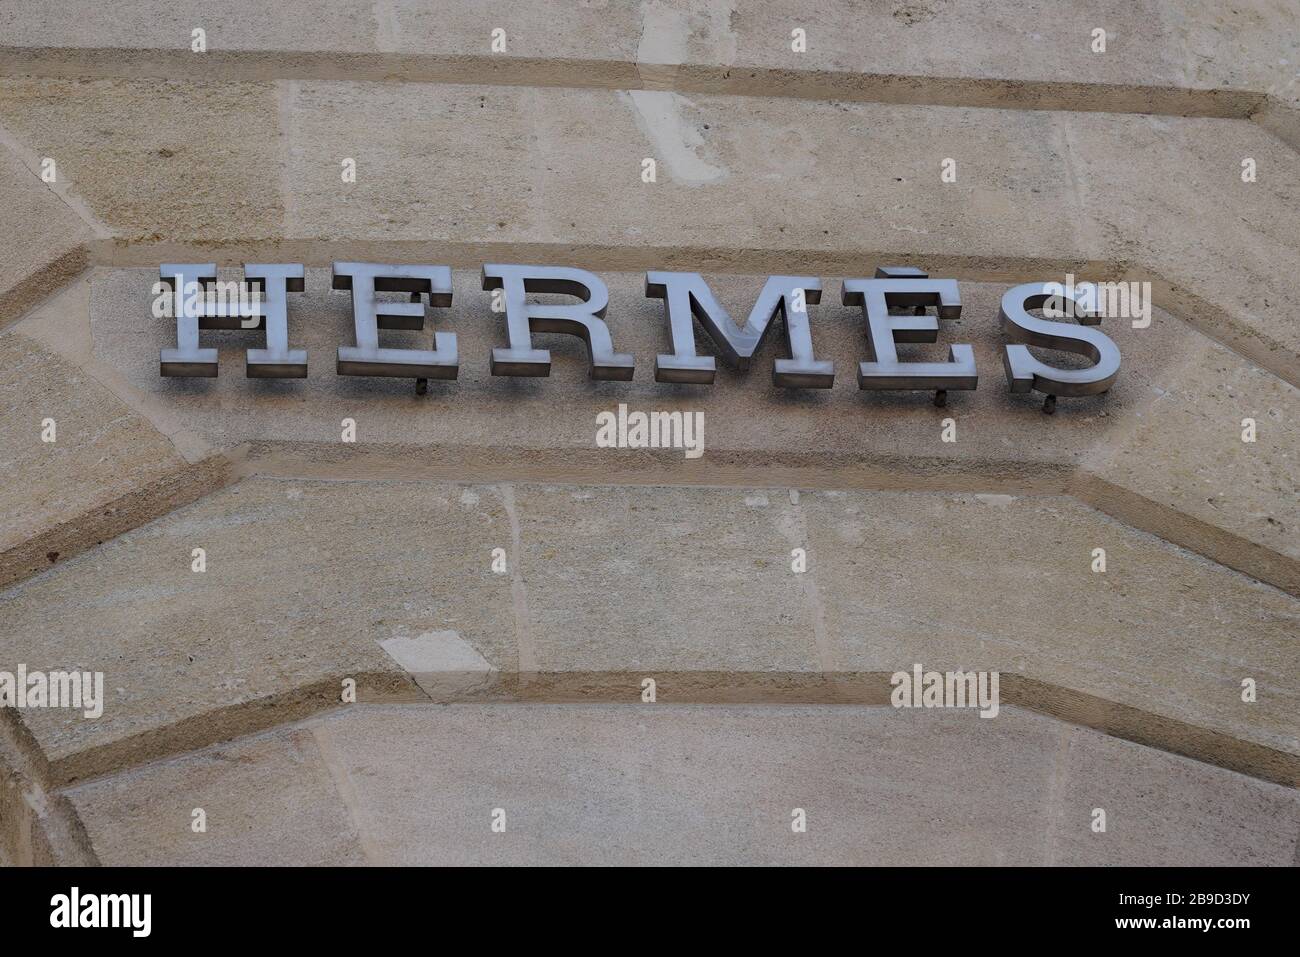 Hermes Fashion Sign Stock Photos & Hermes Fashion Sign Stock Images - Alamy